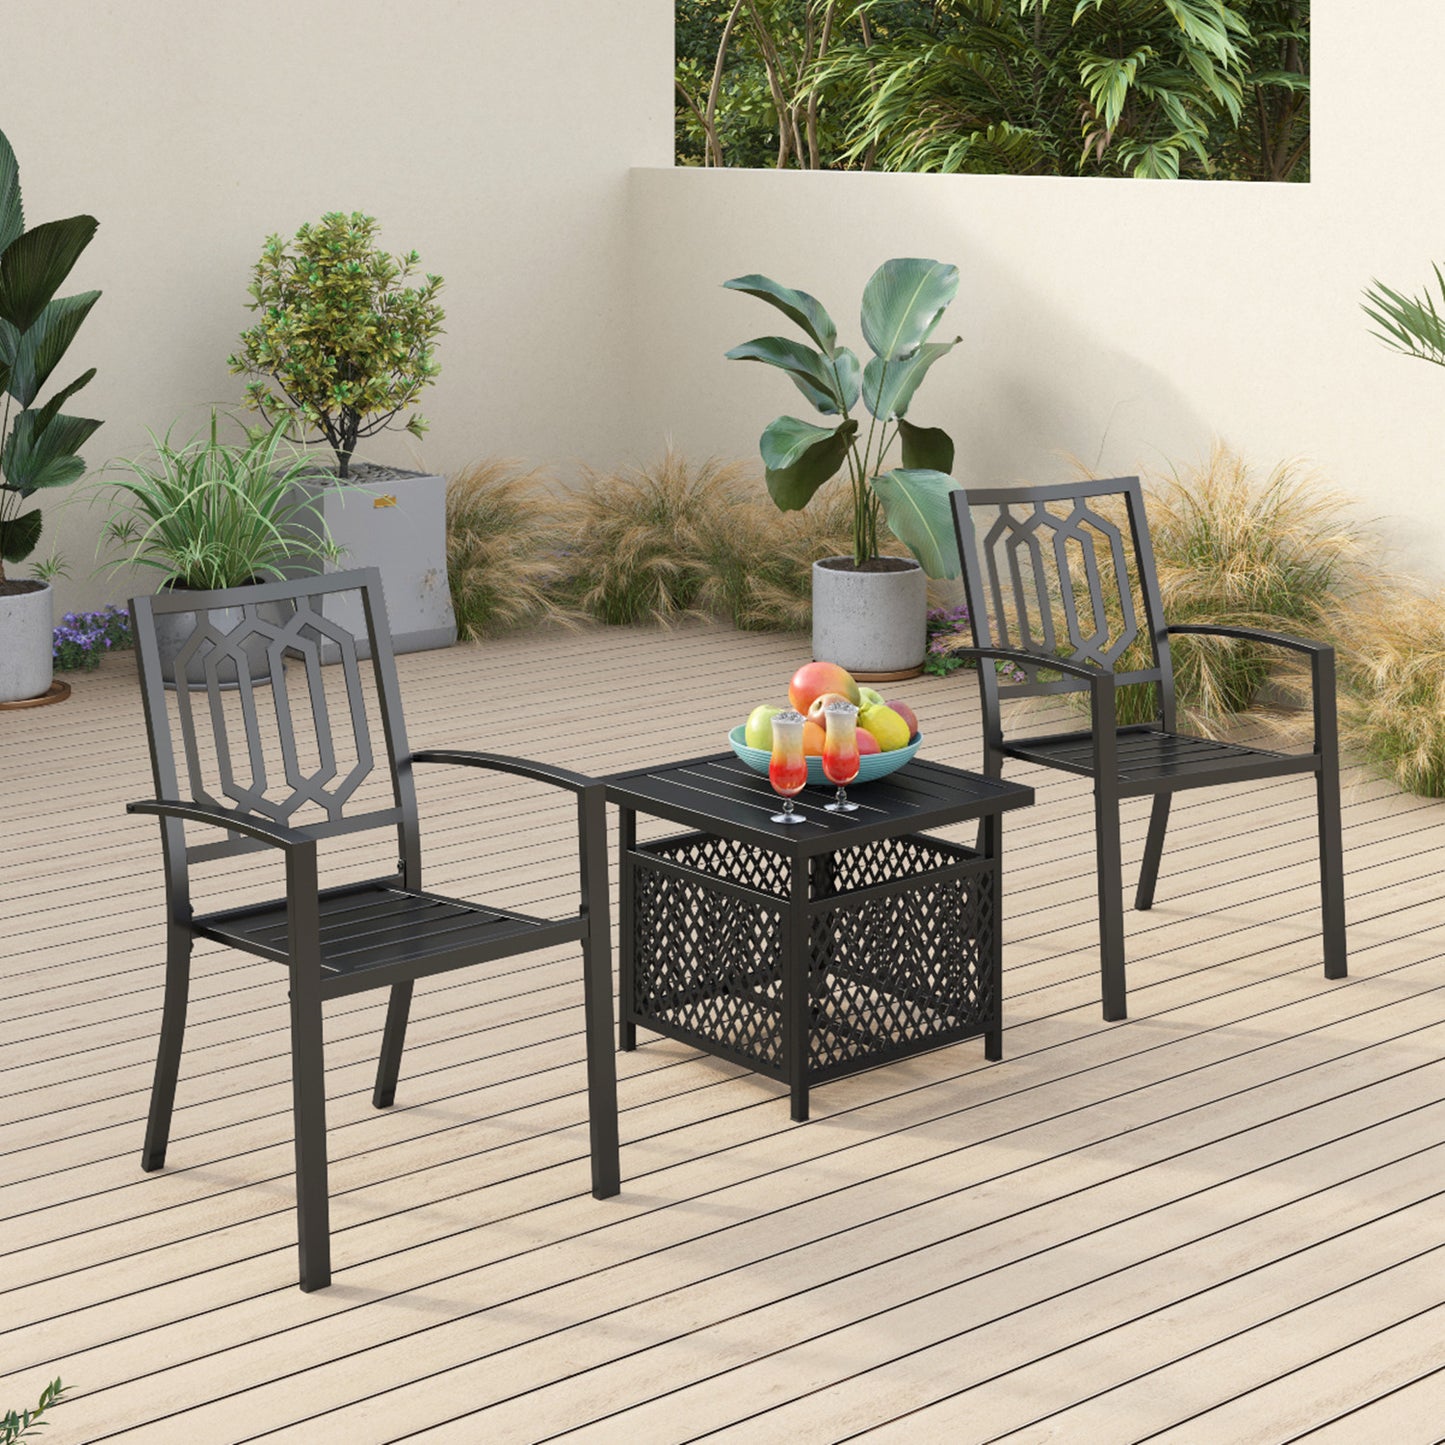 Sophia & William 3 Peices Patio Bistro Set Metal Dining Chairs with Side Table - Black